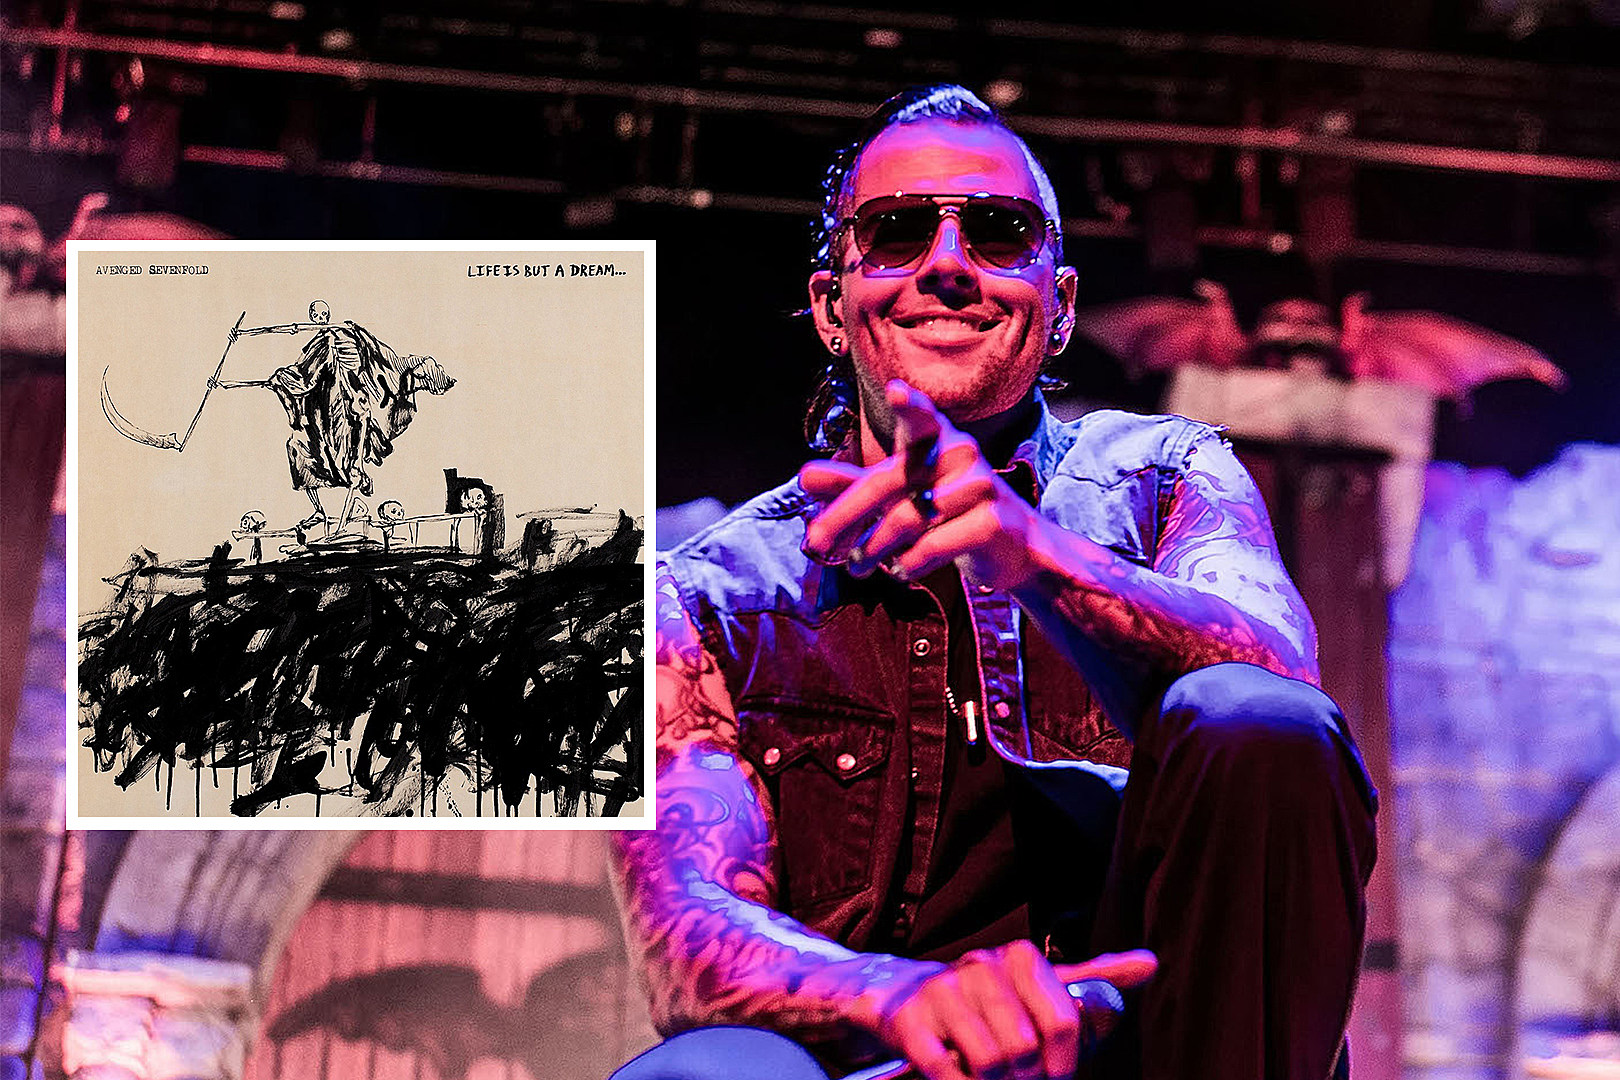 Fans React to Avenged Sevenfold’s New Album ‘Life Is But a Dream’